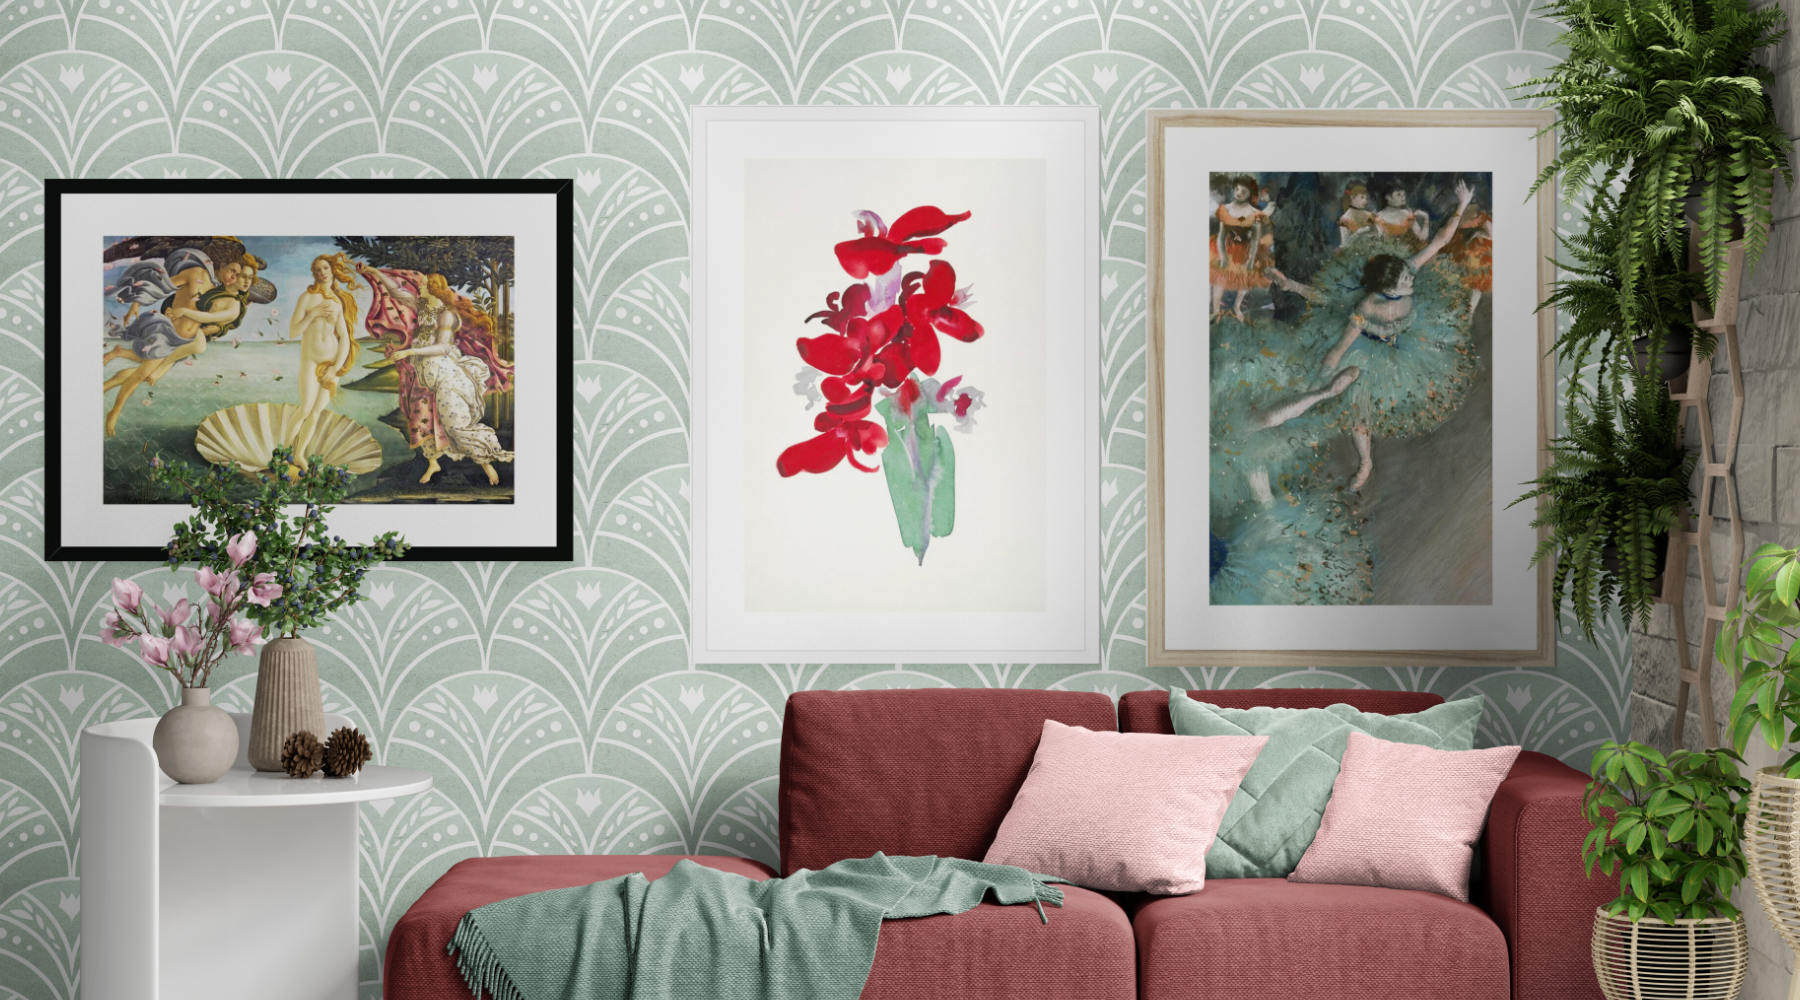 Top Famous Paintings art prints displayed in an interior setting